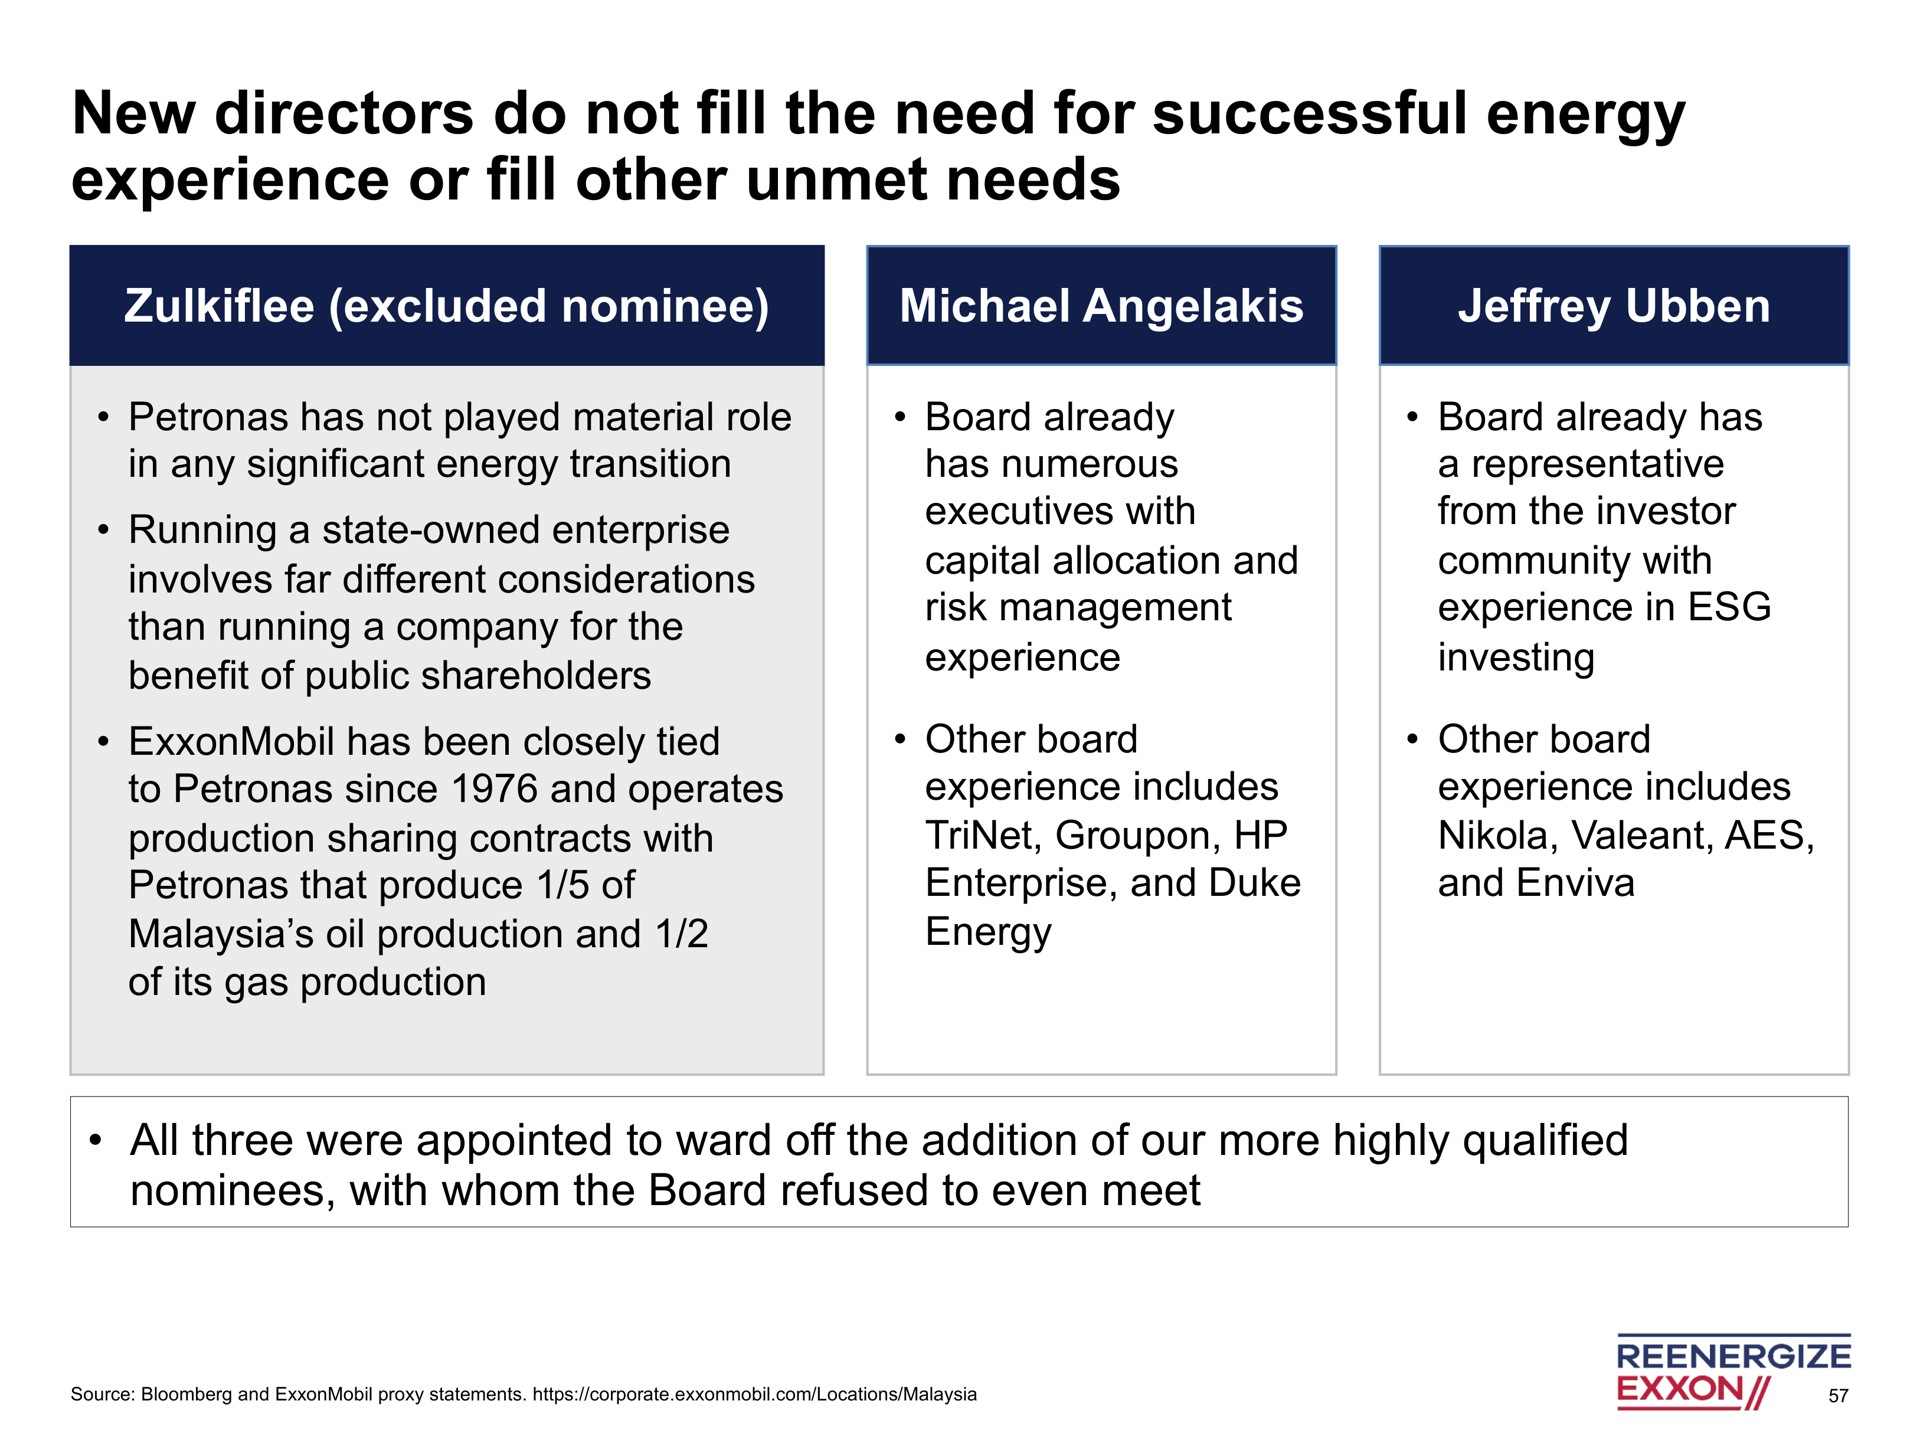 new directors do not fill the need for successful energy experience or fill other unmet needs | Engine No. 1